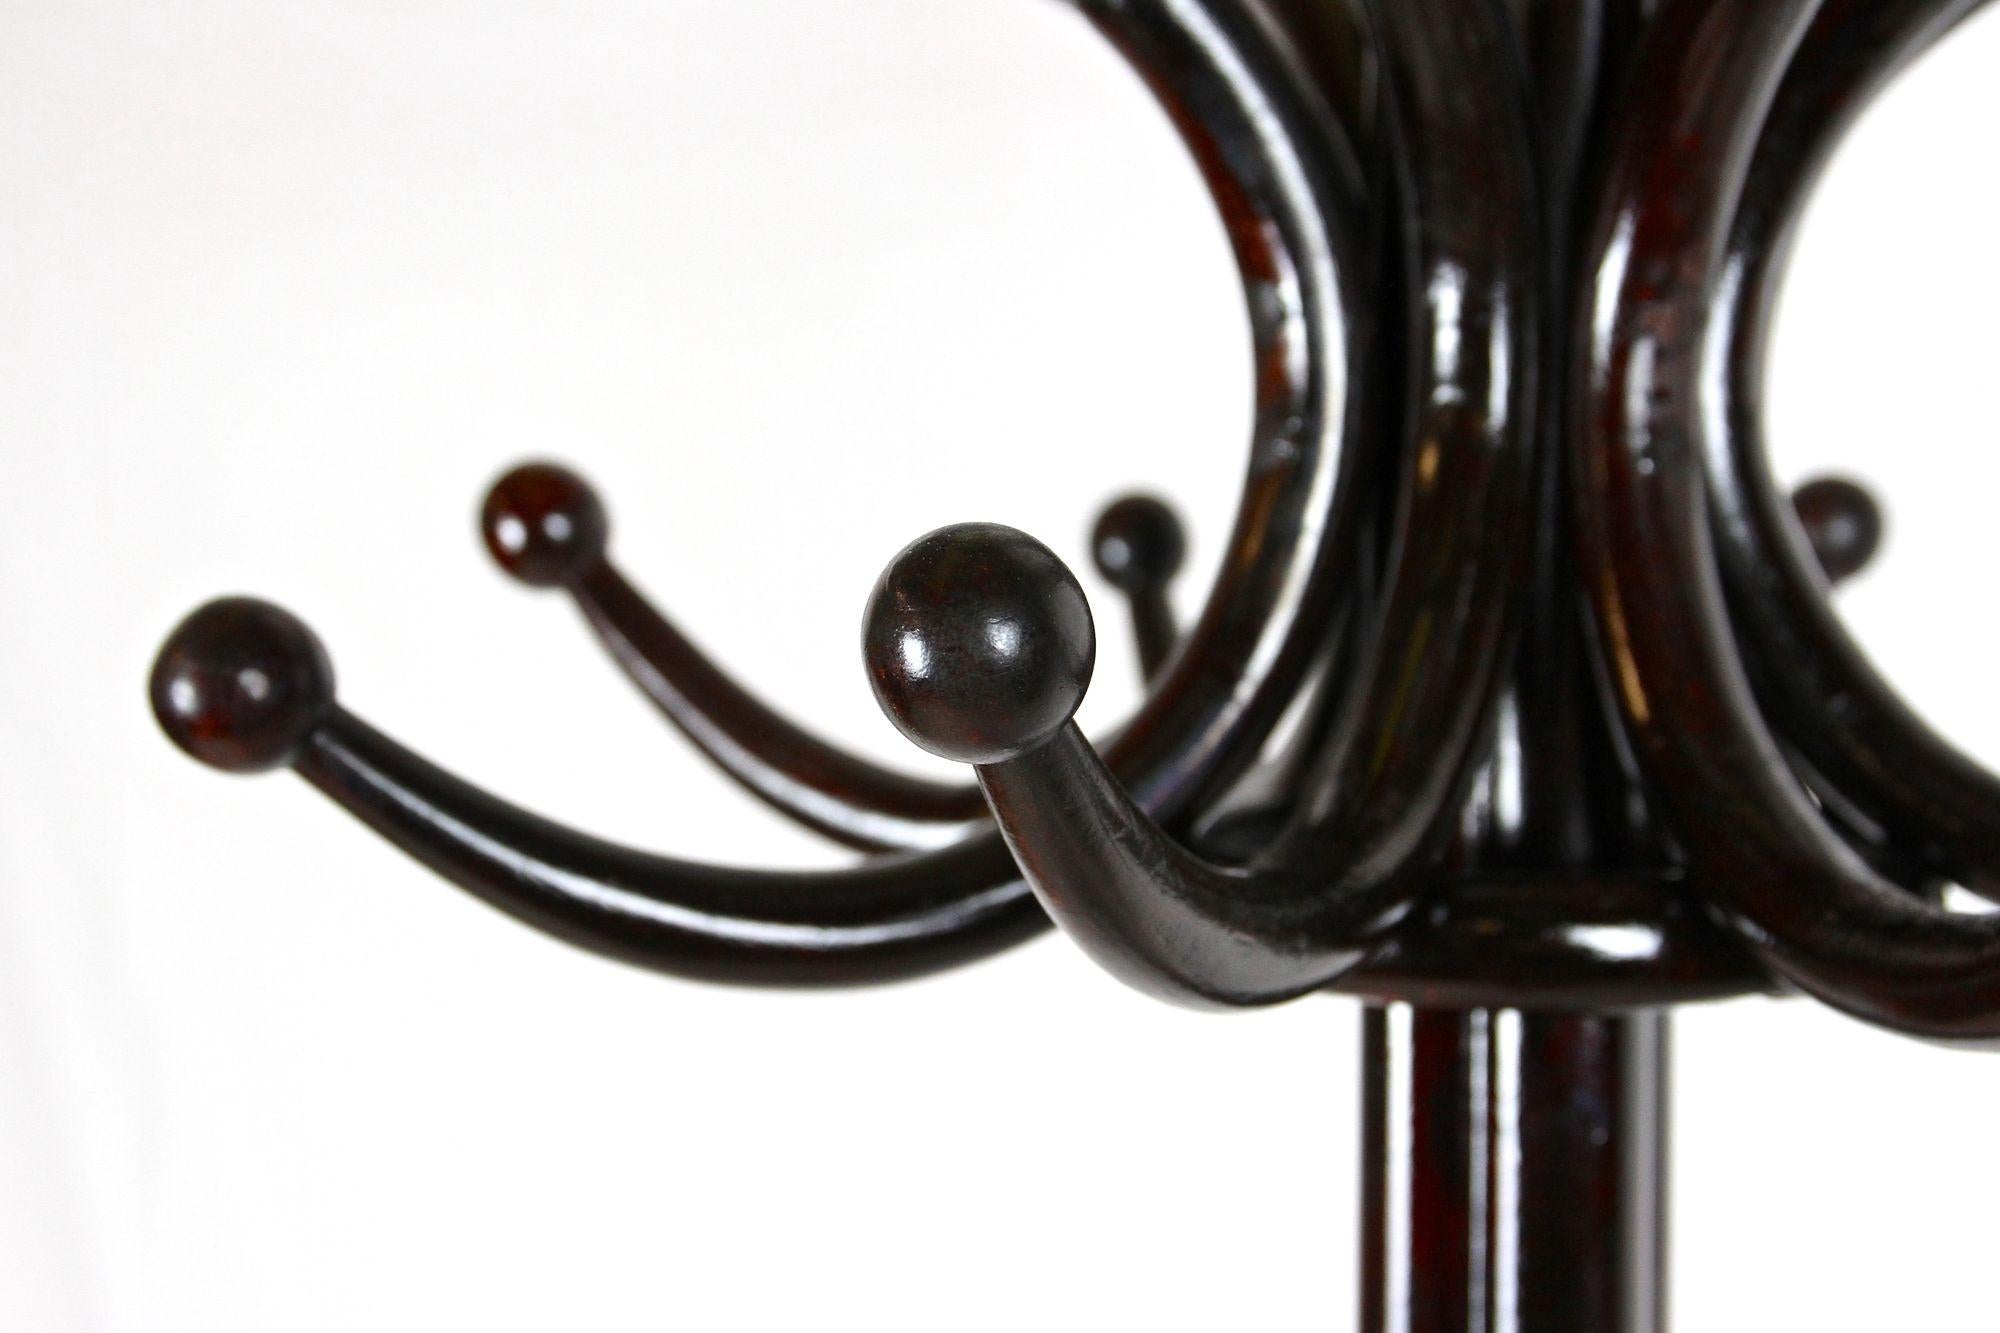 Thonet Coat Rack/ Wardrobe Stand Bentwood Polished, Art Nouveau, AT ca. 1905 For Sale 2